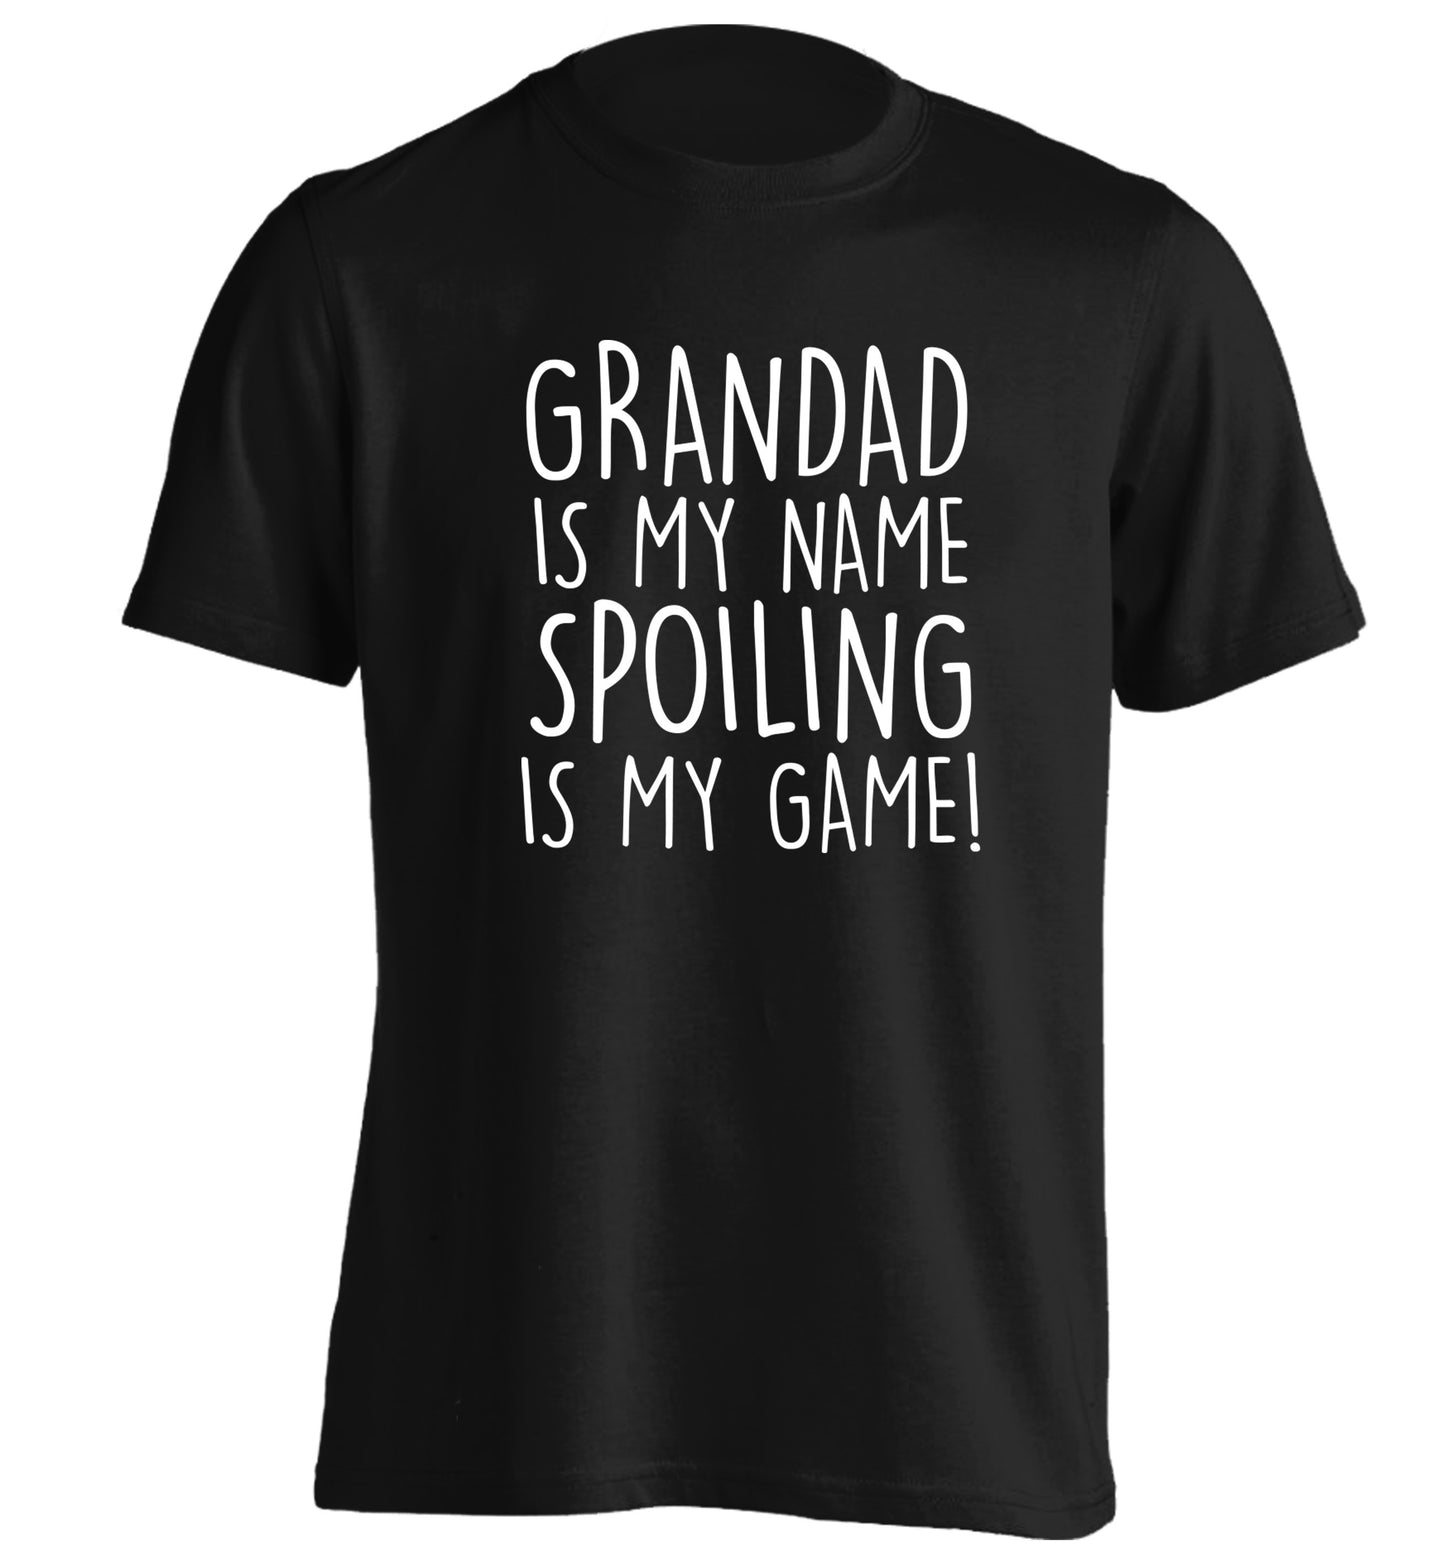 Grandad is my name, spoiling is my game adults unisex black Tshirt 2XL